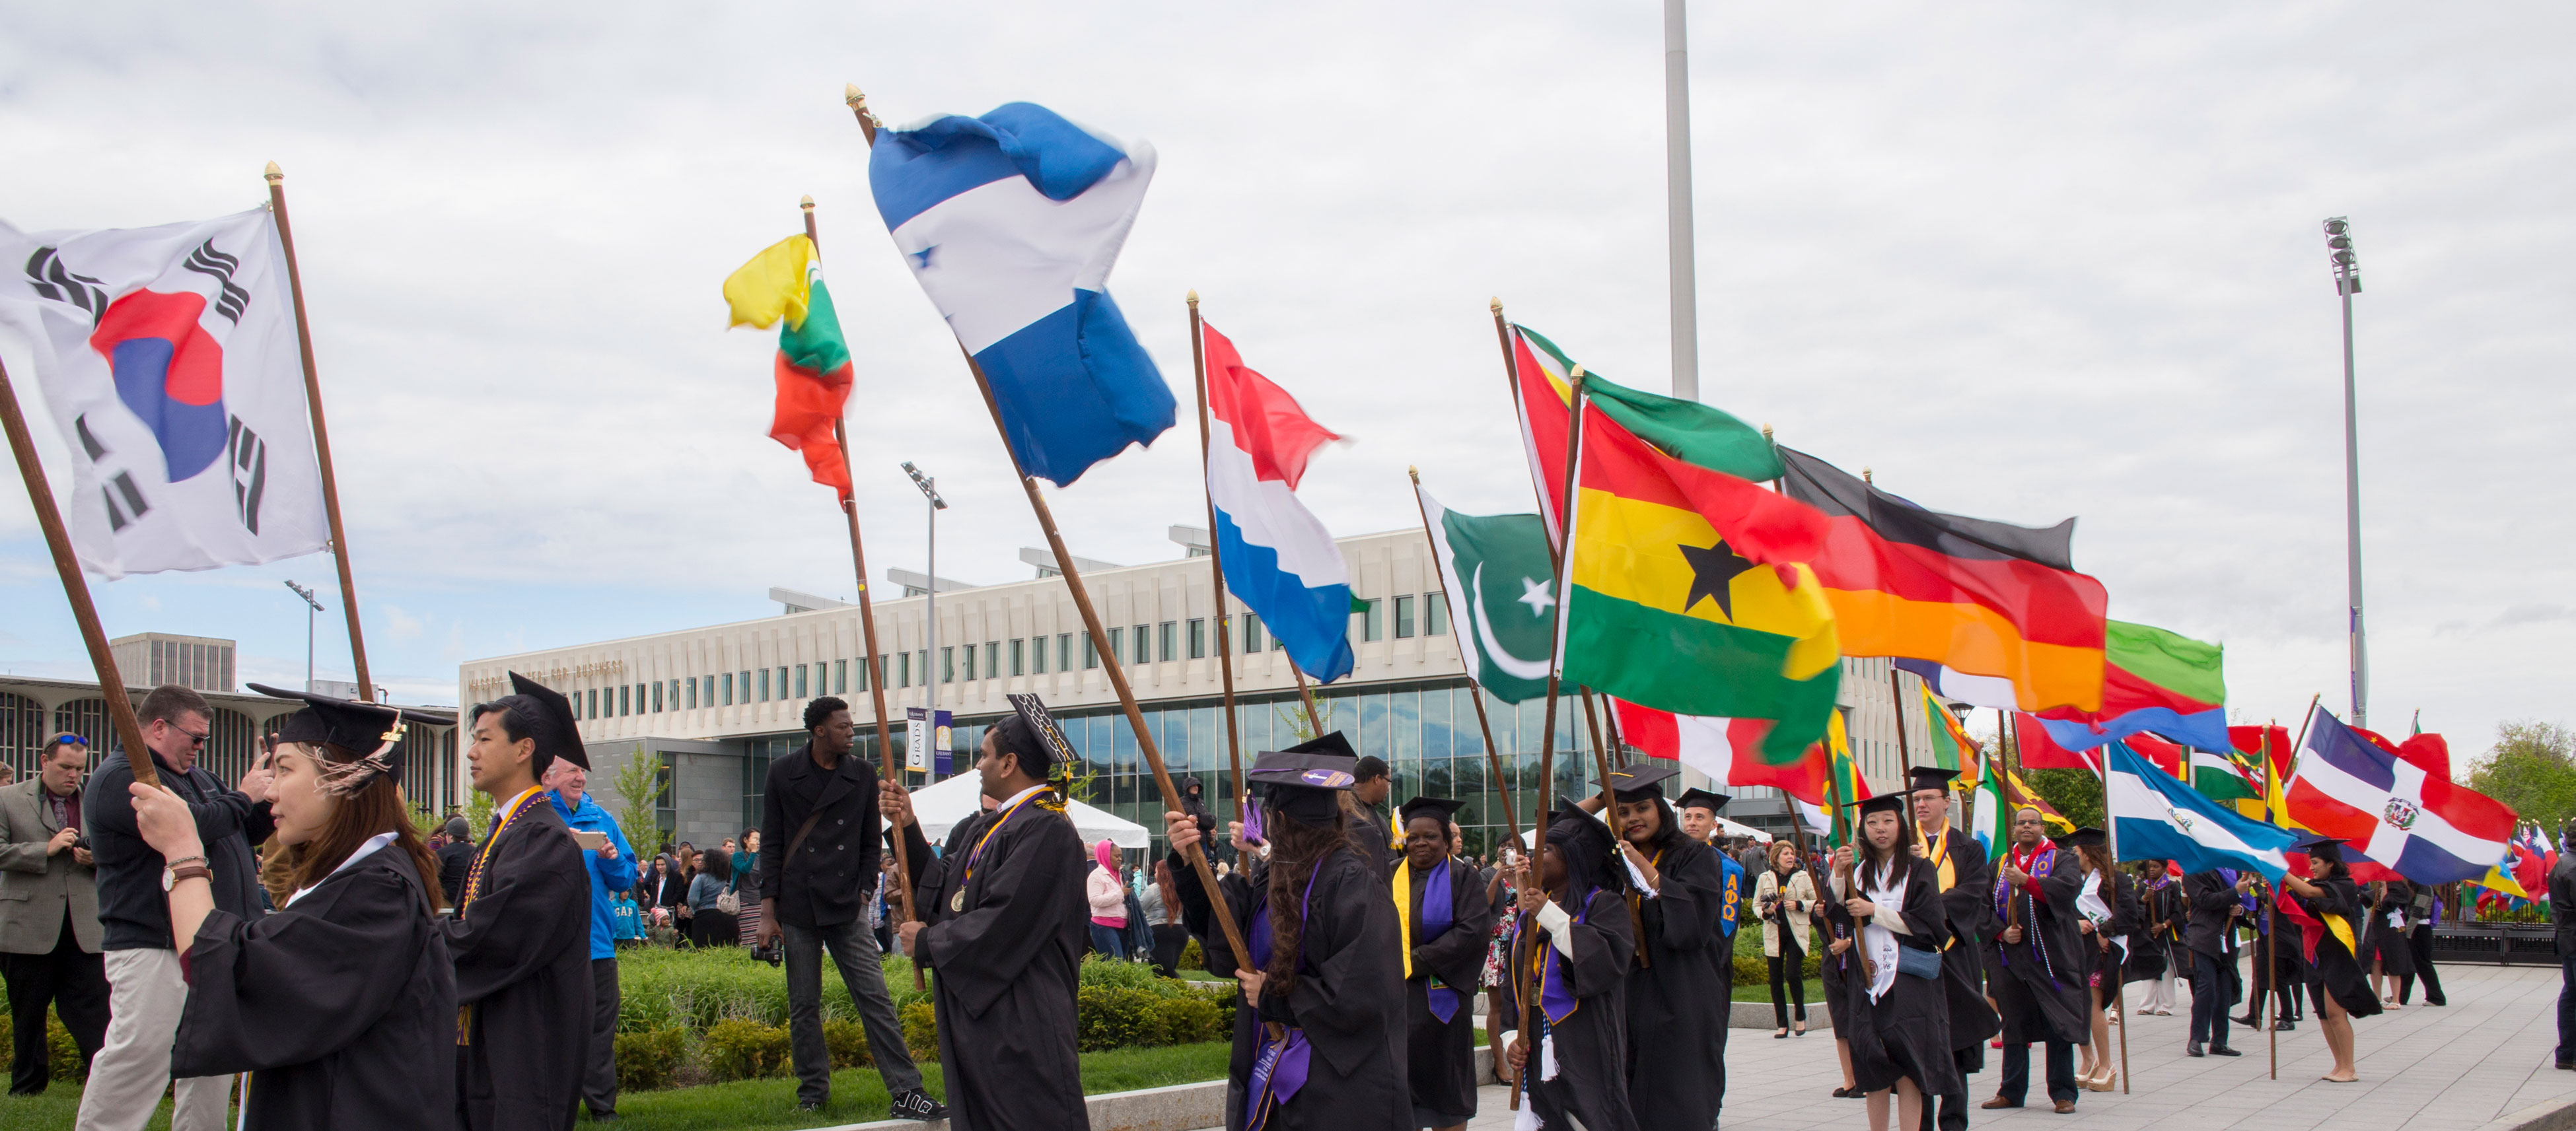 Students wearing graduate caps and gowns walk through campus holding flags from various countries.